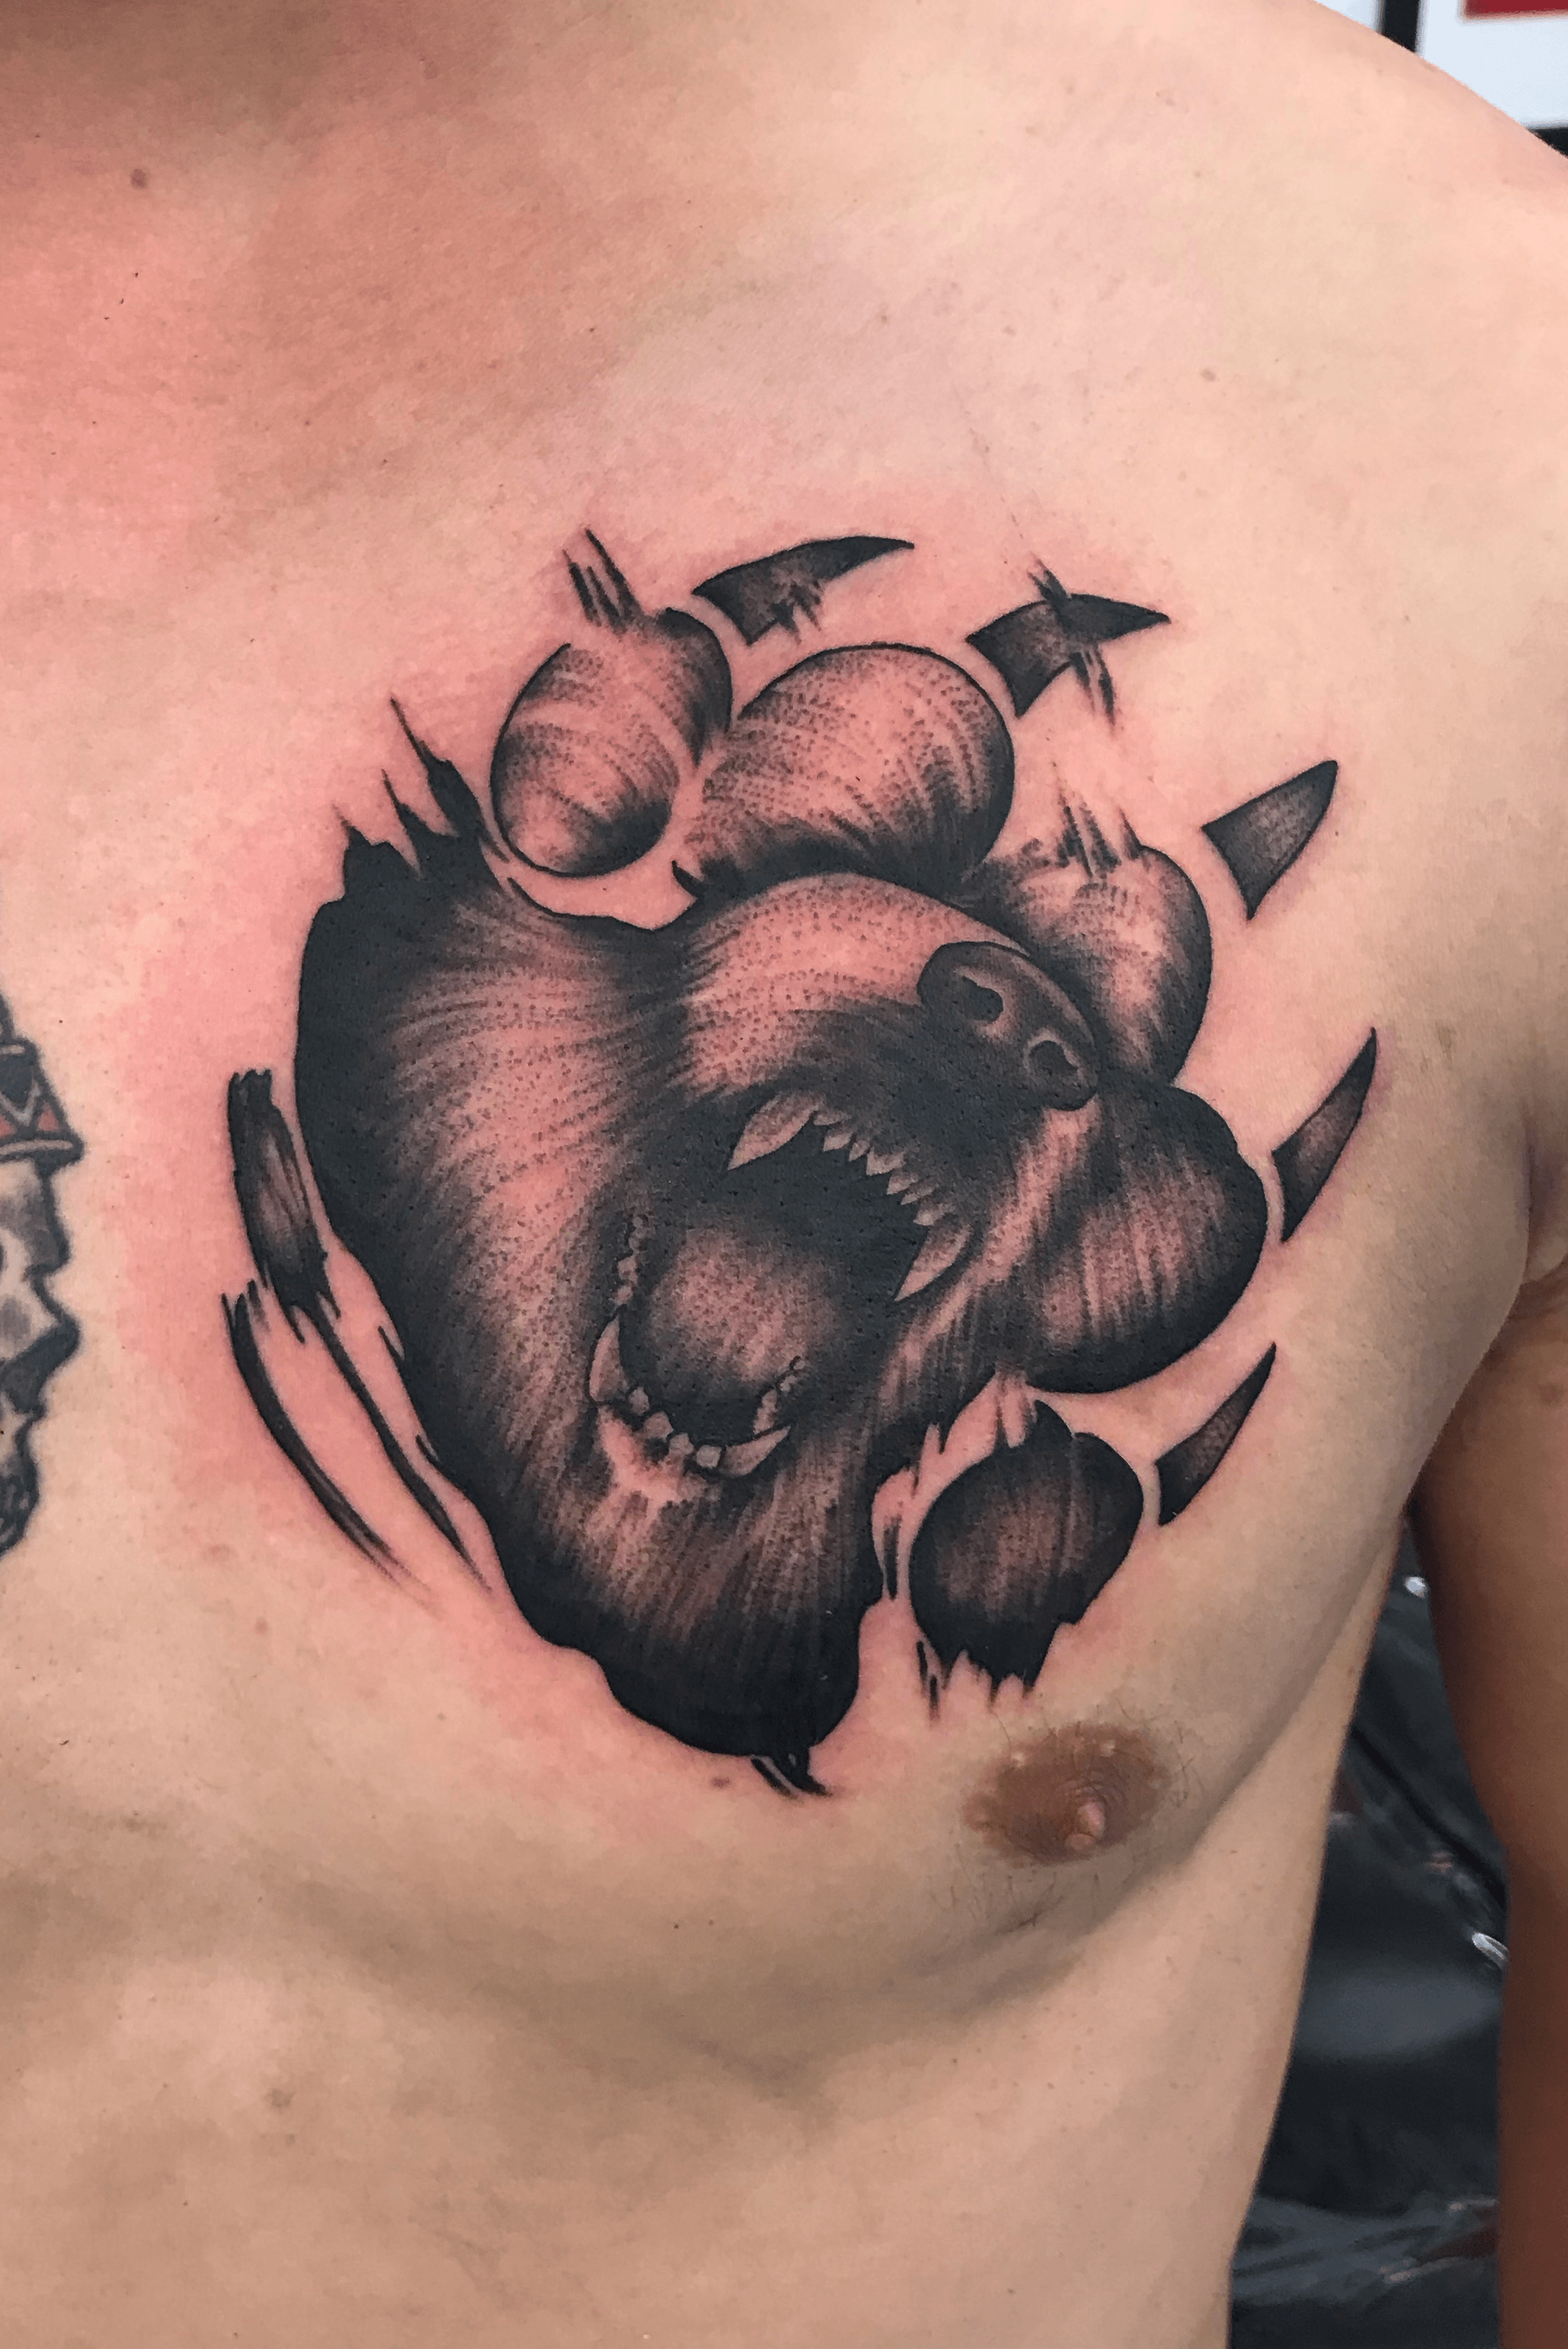 12 Best Grizzly Bear Tattoo Designs and Ideas  PetPress